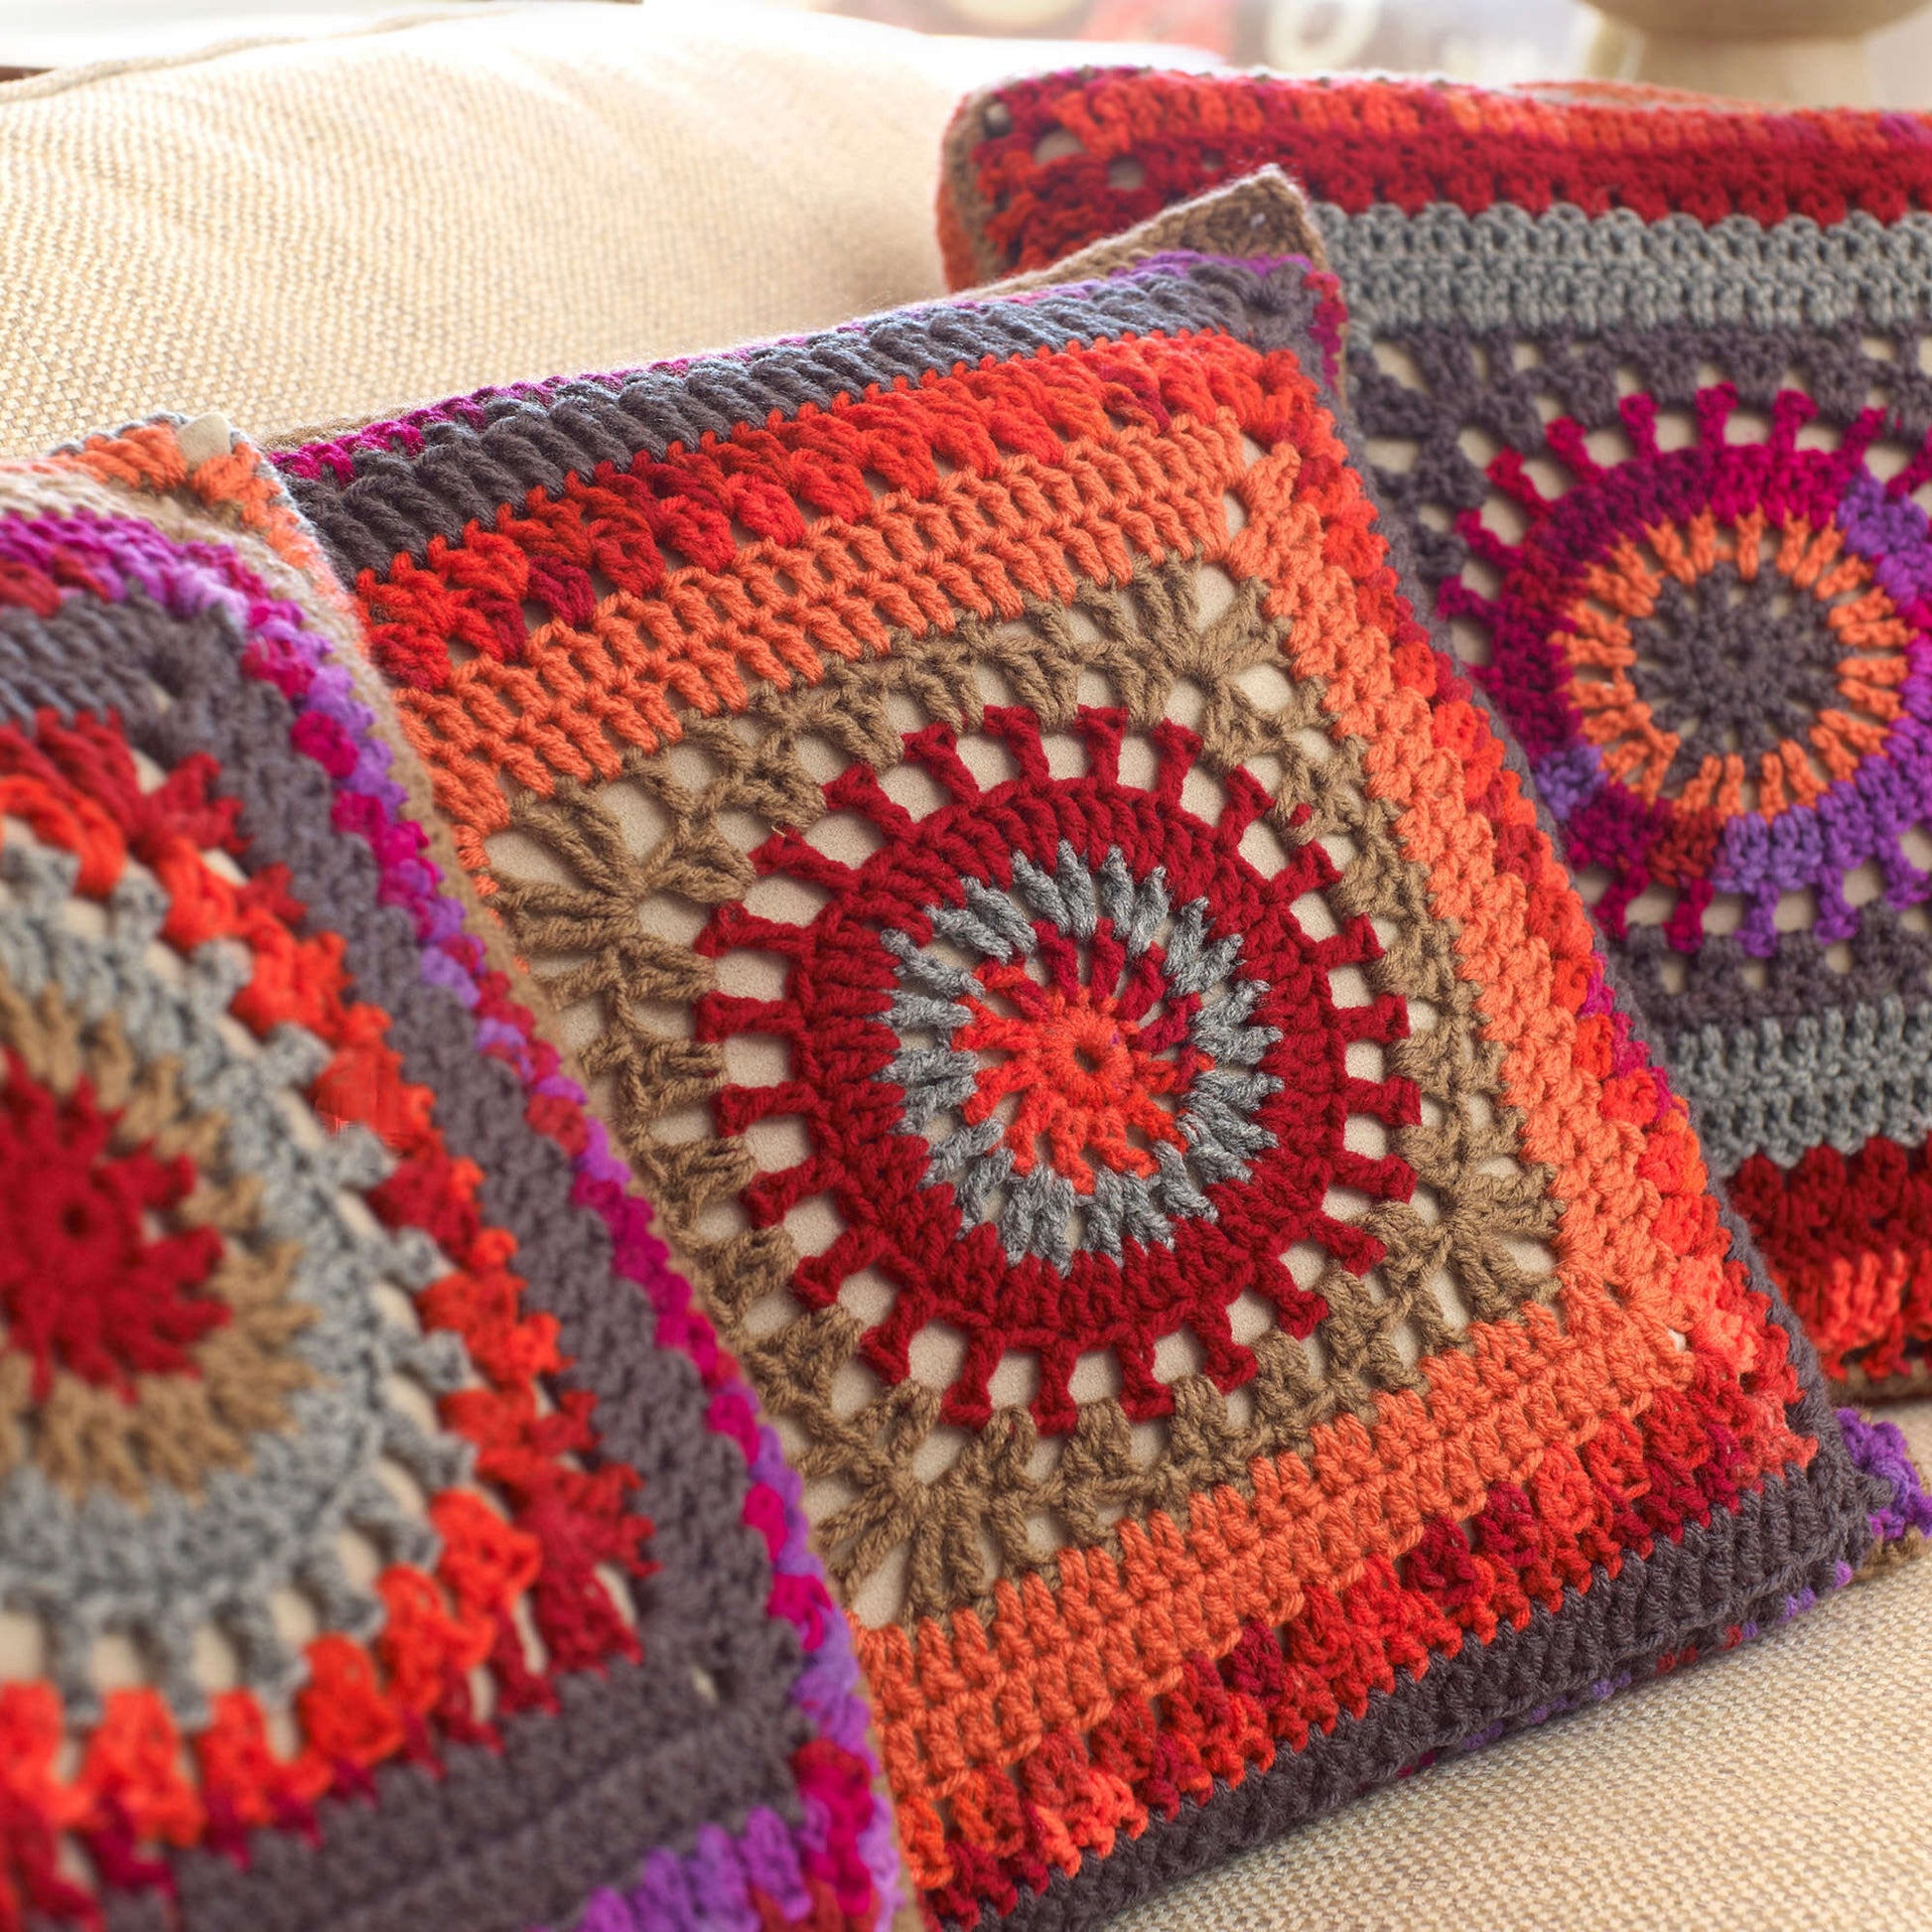 Free Red Heart Crochet Circle In The Square Pillows Pattern